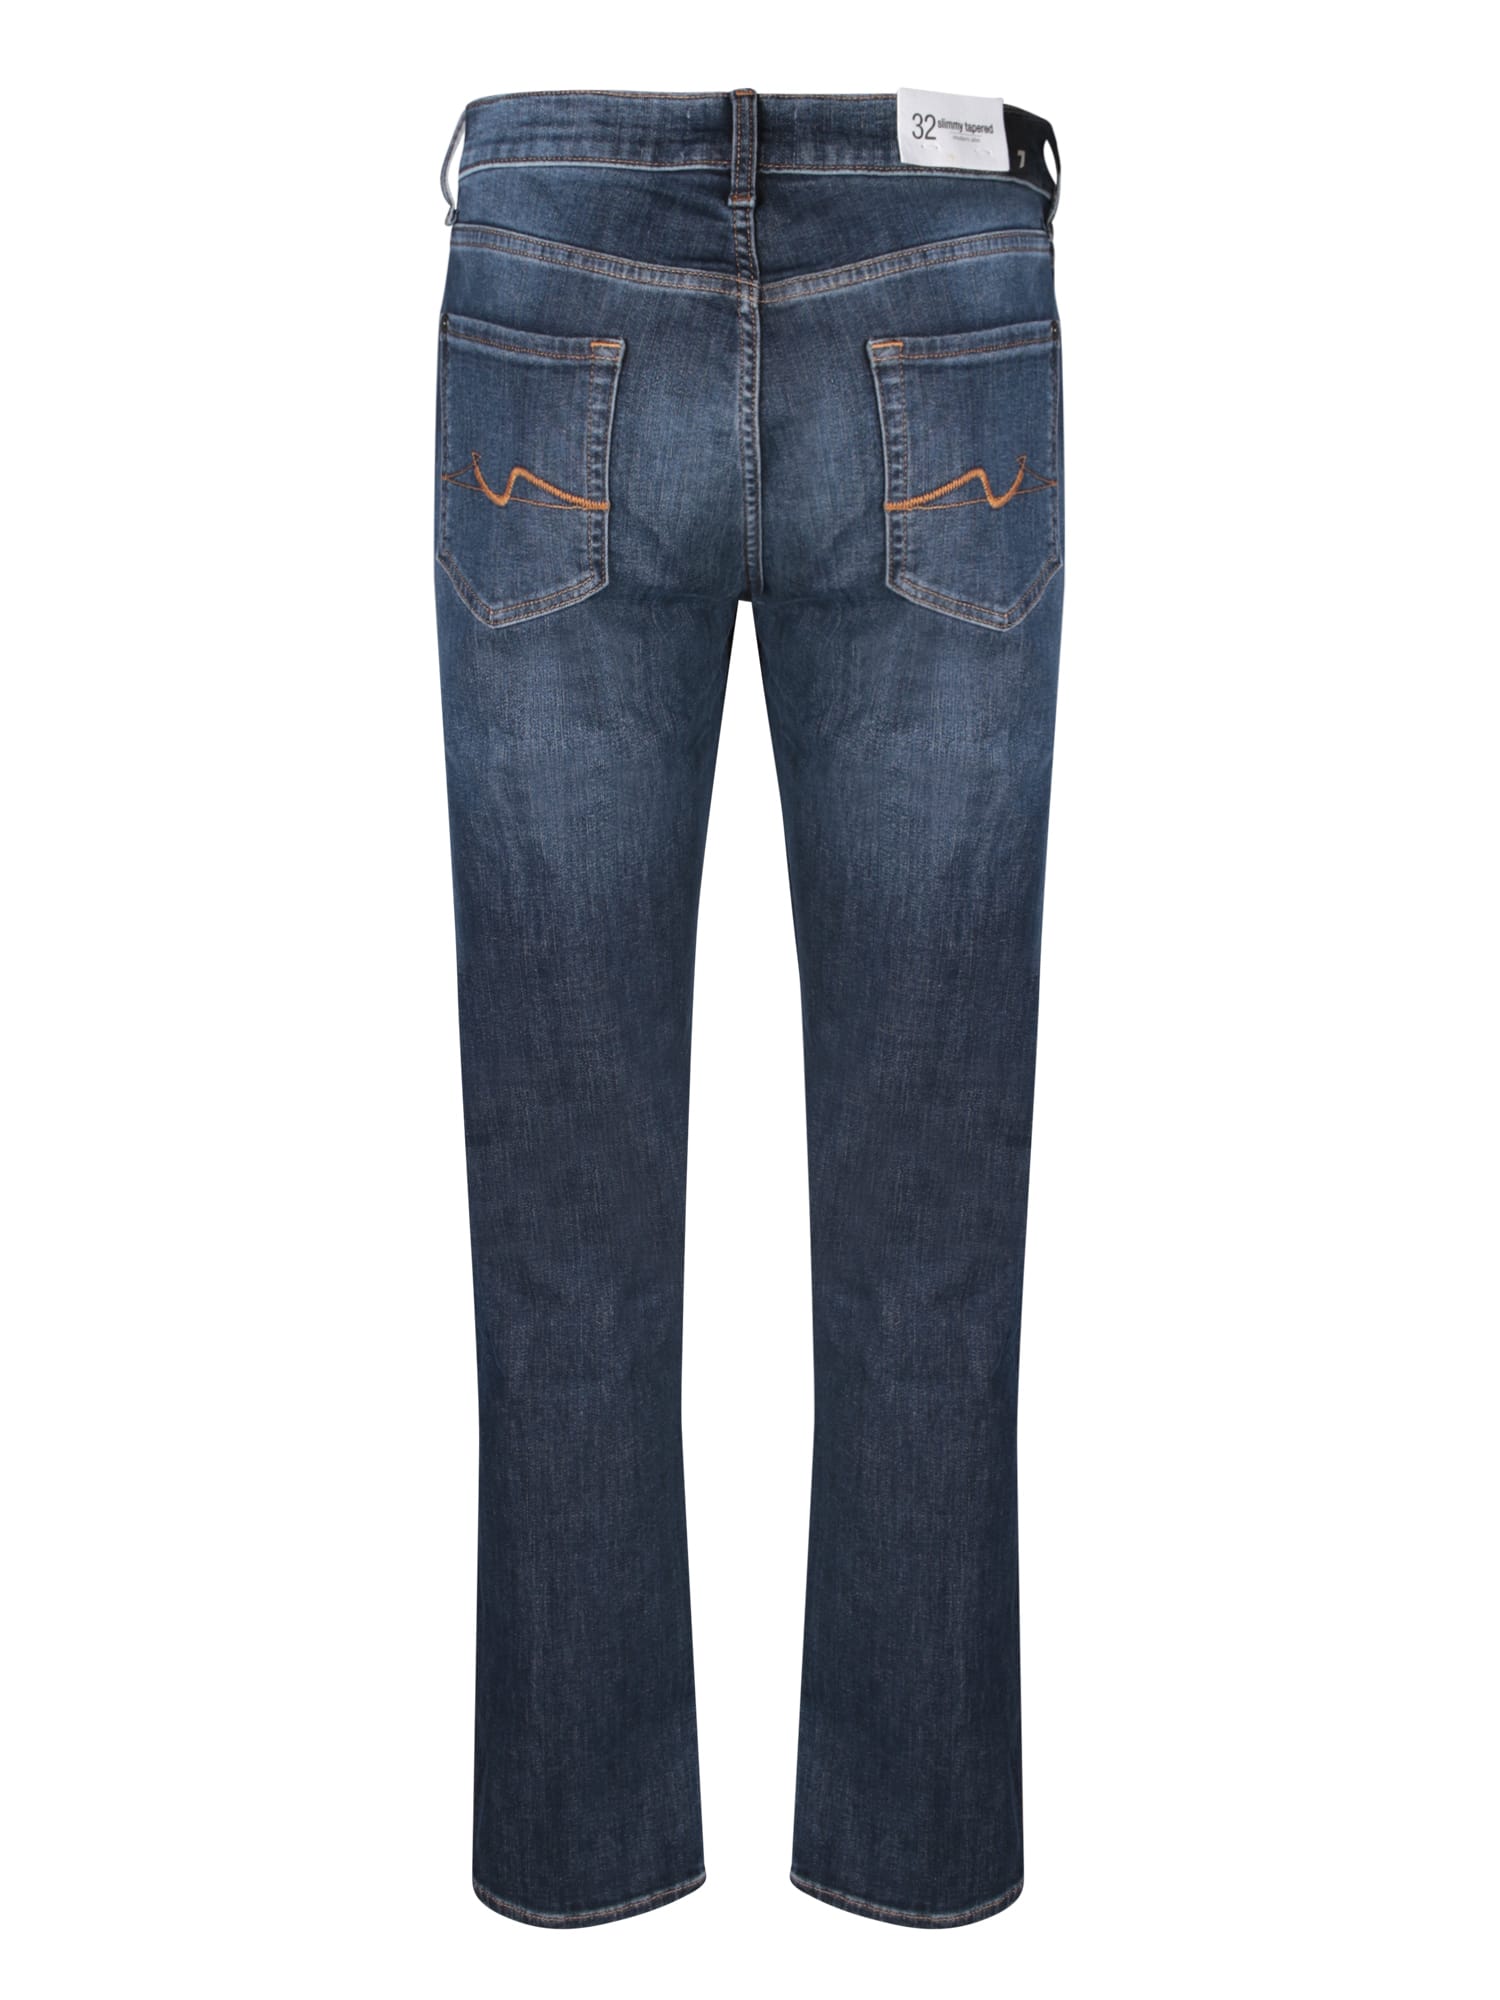 Shop 7 For All Mankind Slimmy Tapered Dark Blue Jeans